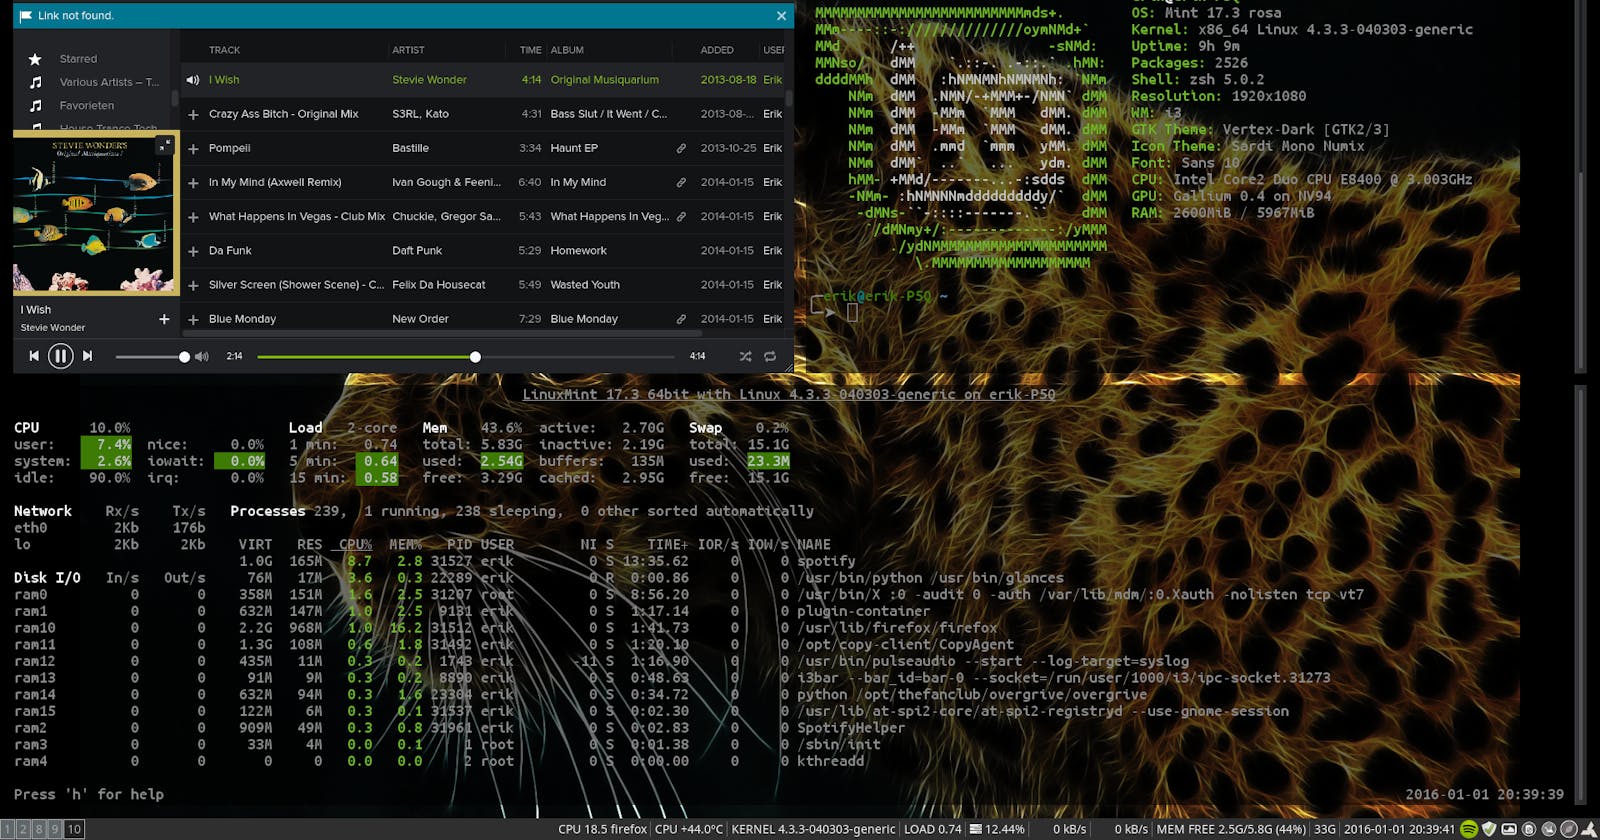 How to install i3 tiling window manager on Linux Mint